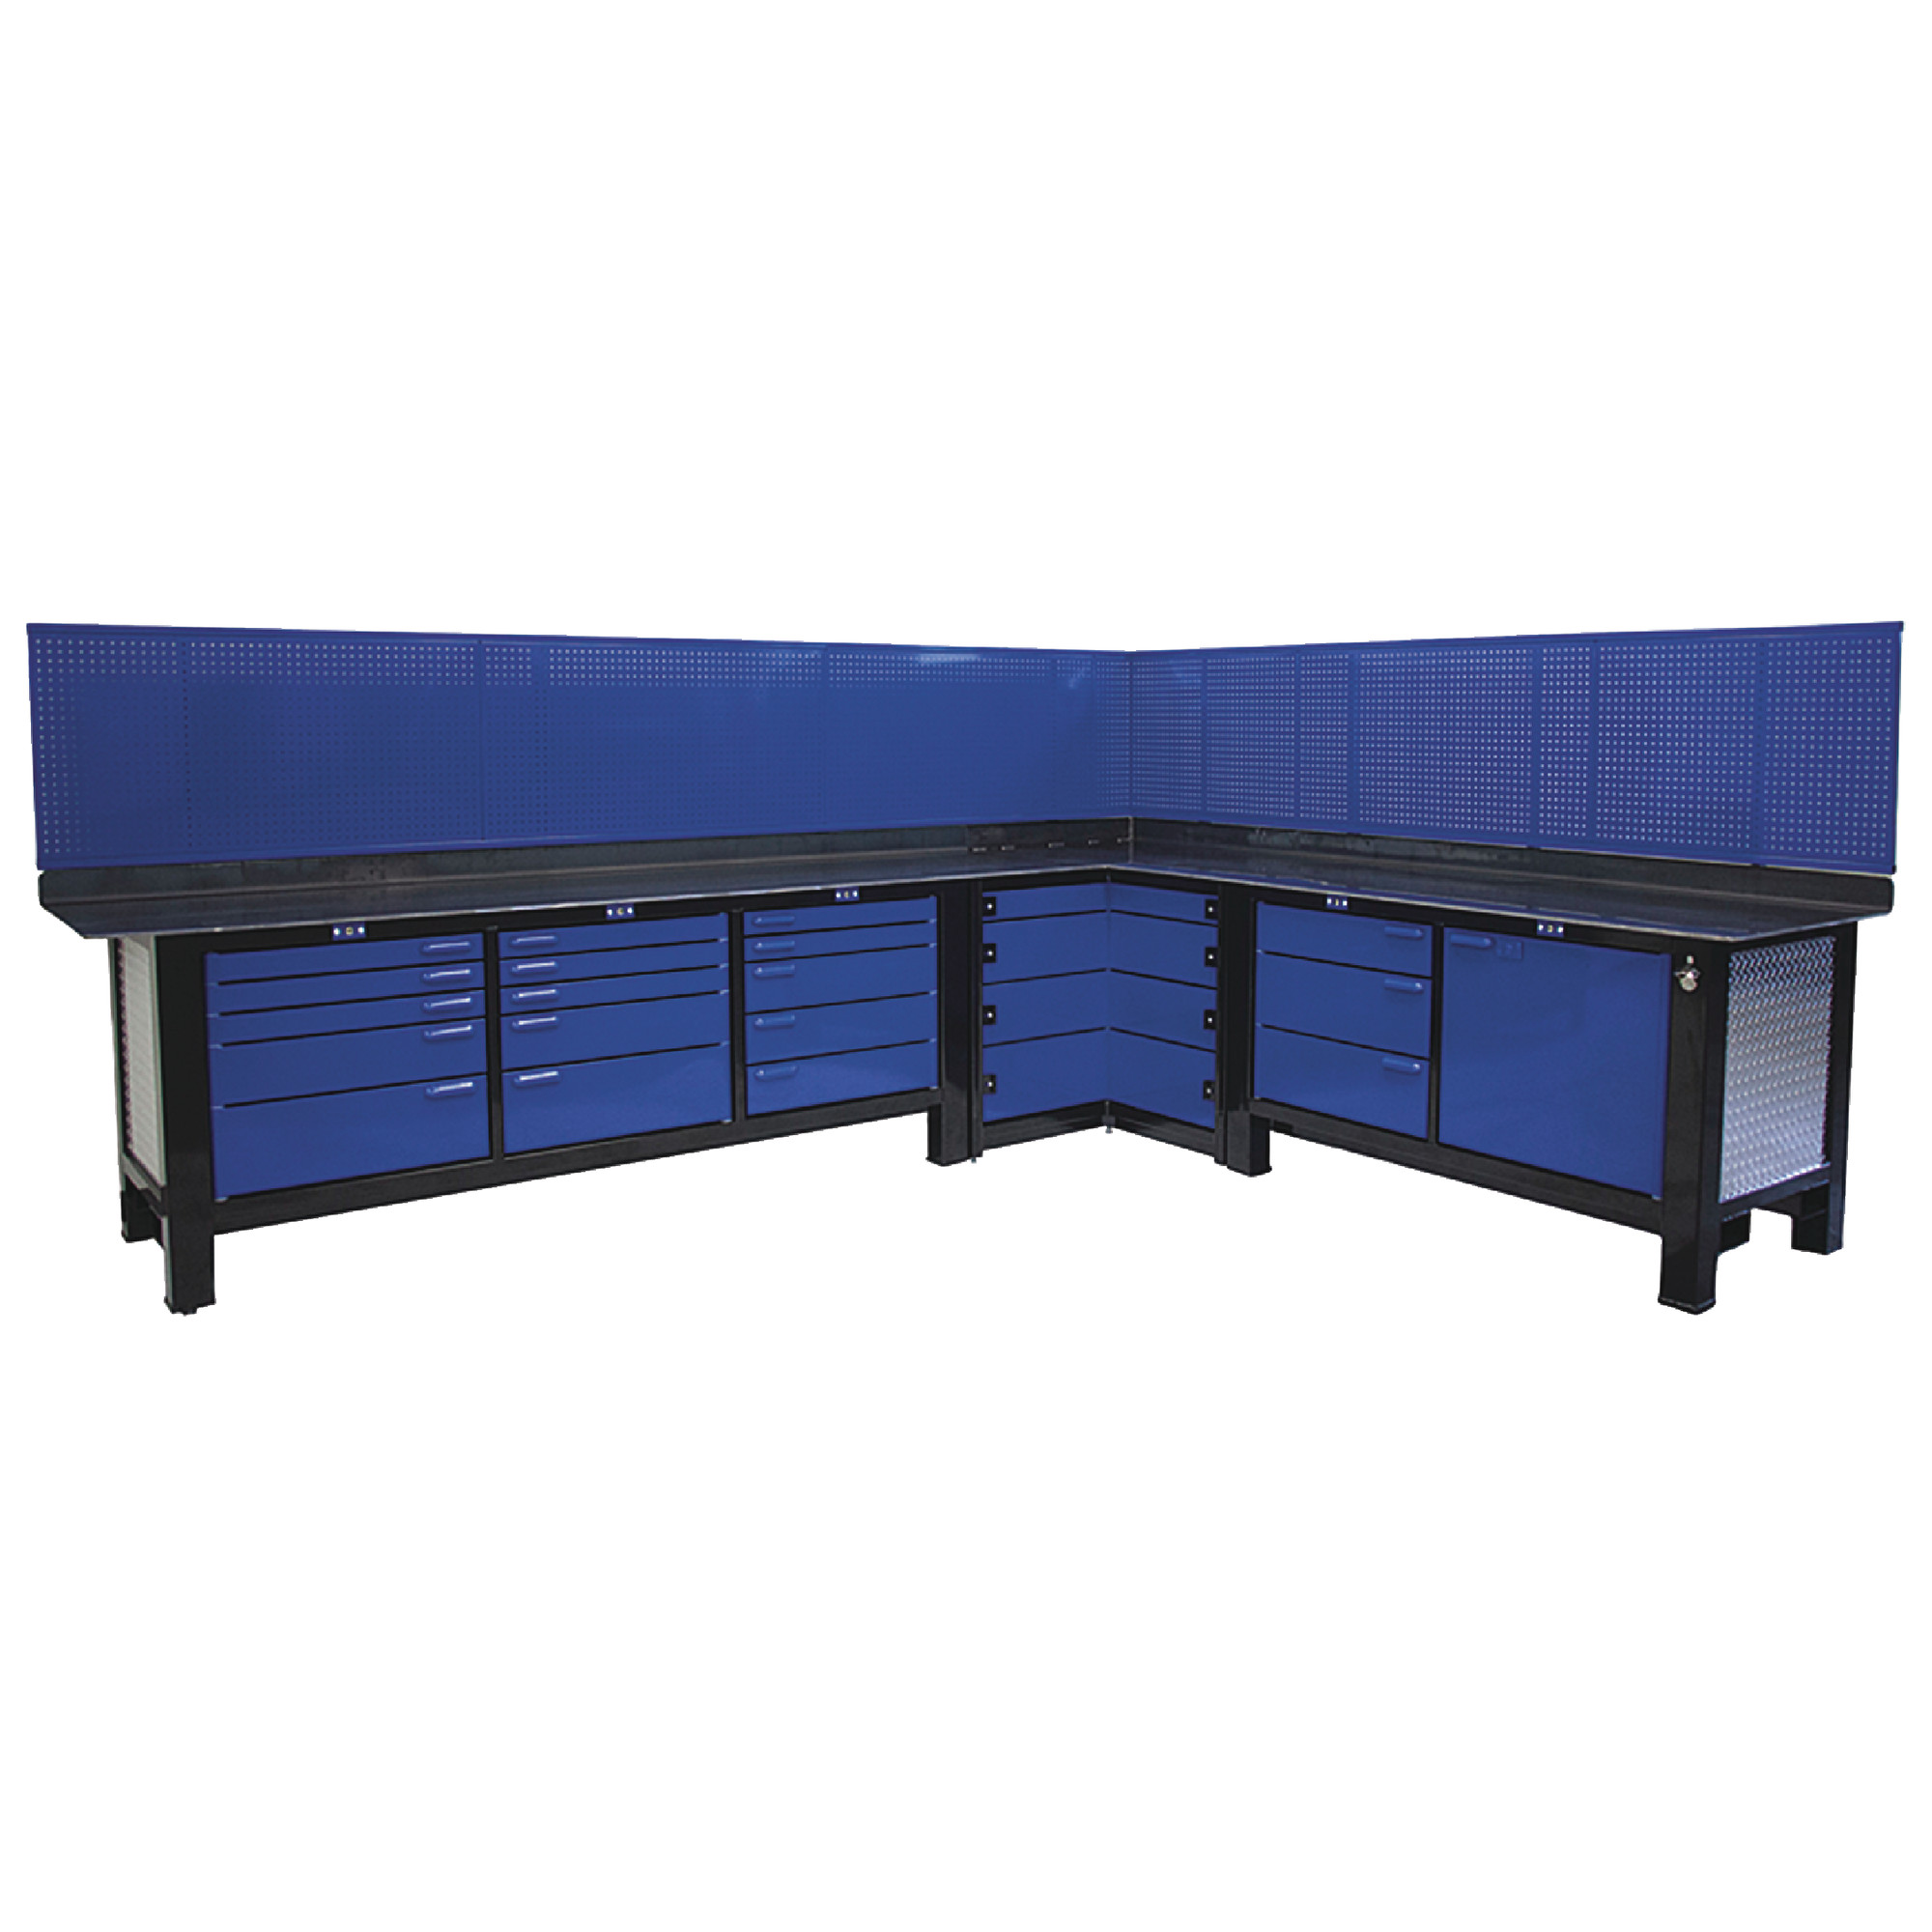 Corner Unit Workbench Includes Corner Unit And Two 2Bay Units On Both Sides